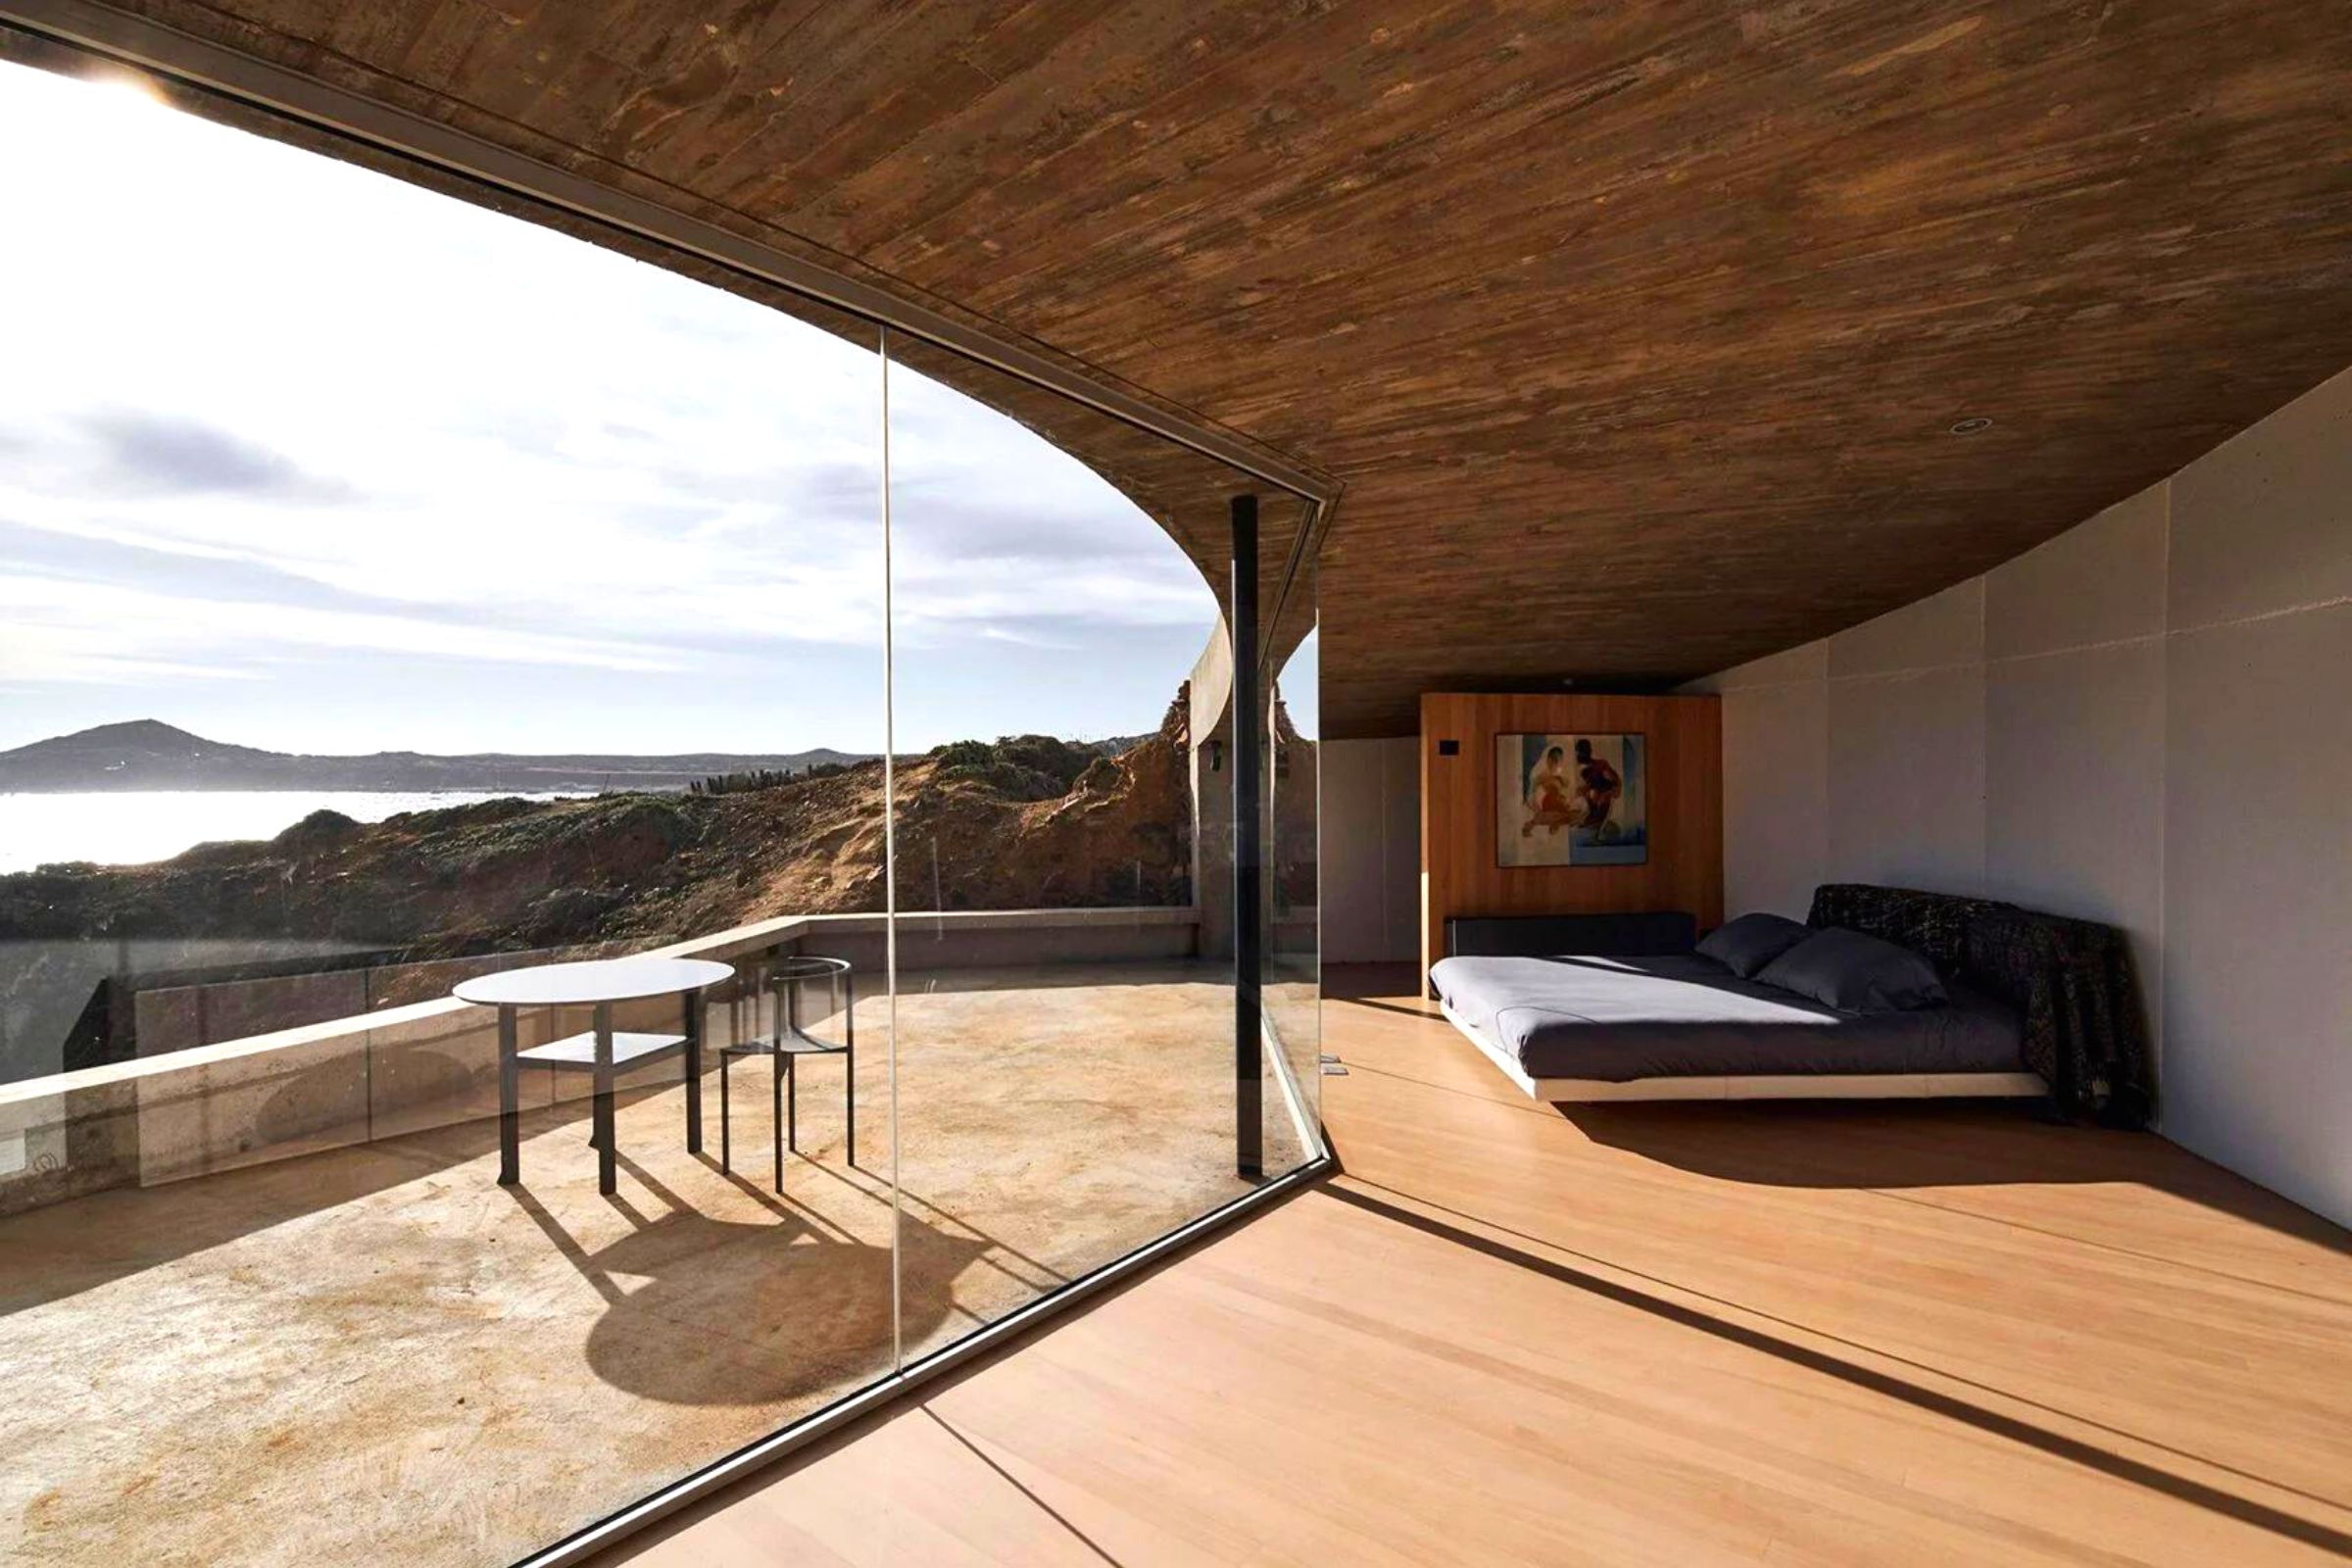 House in Los Vilos in Chile by Ryue Nishizawa